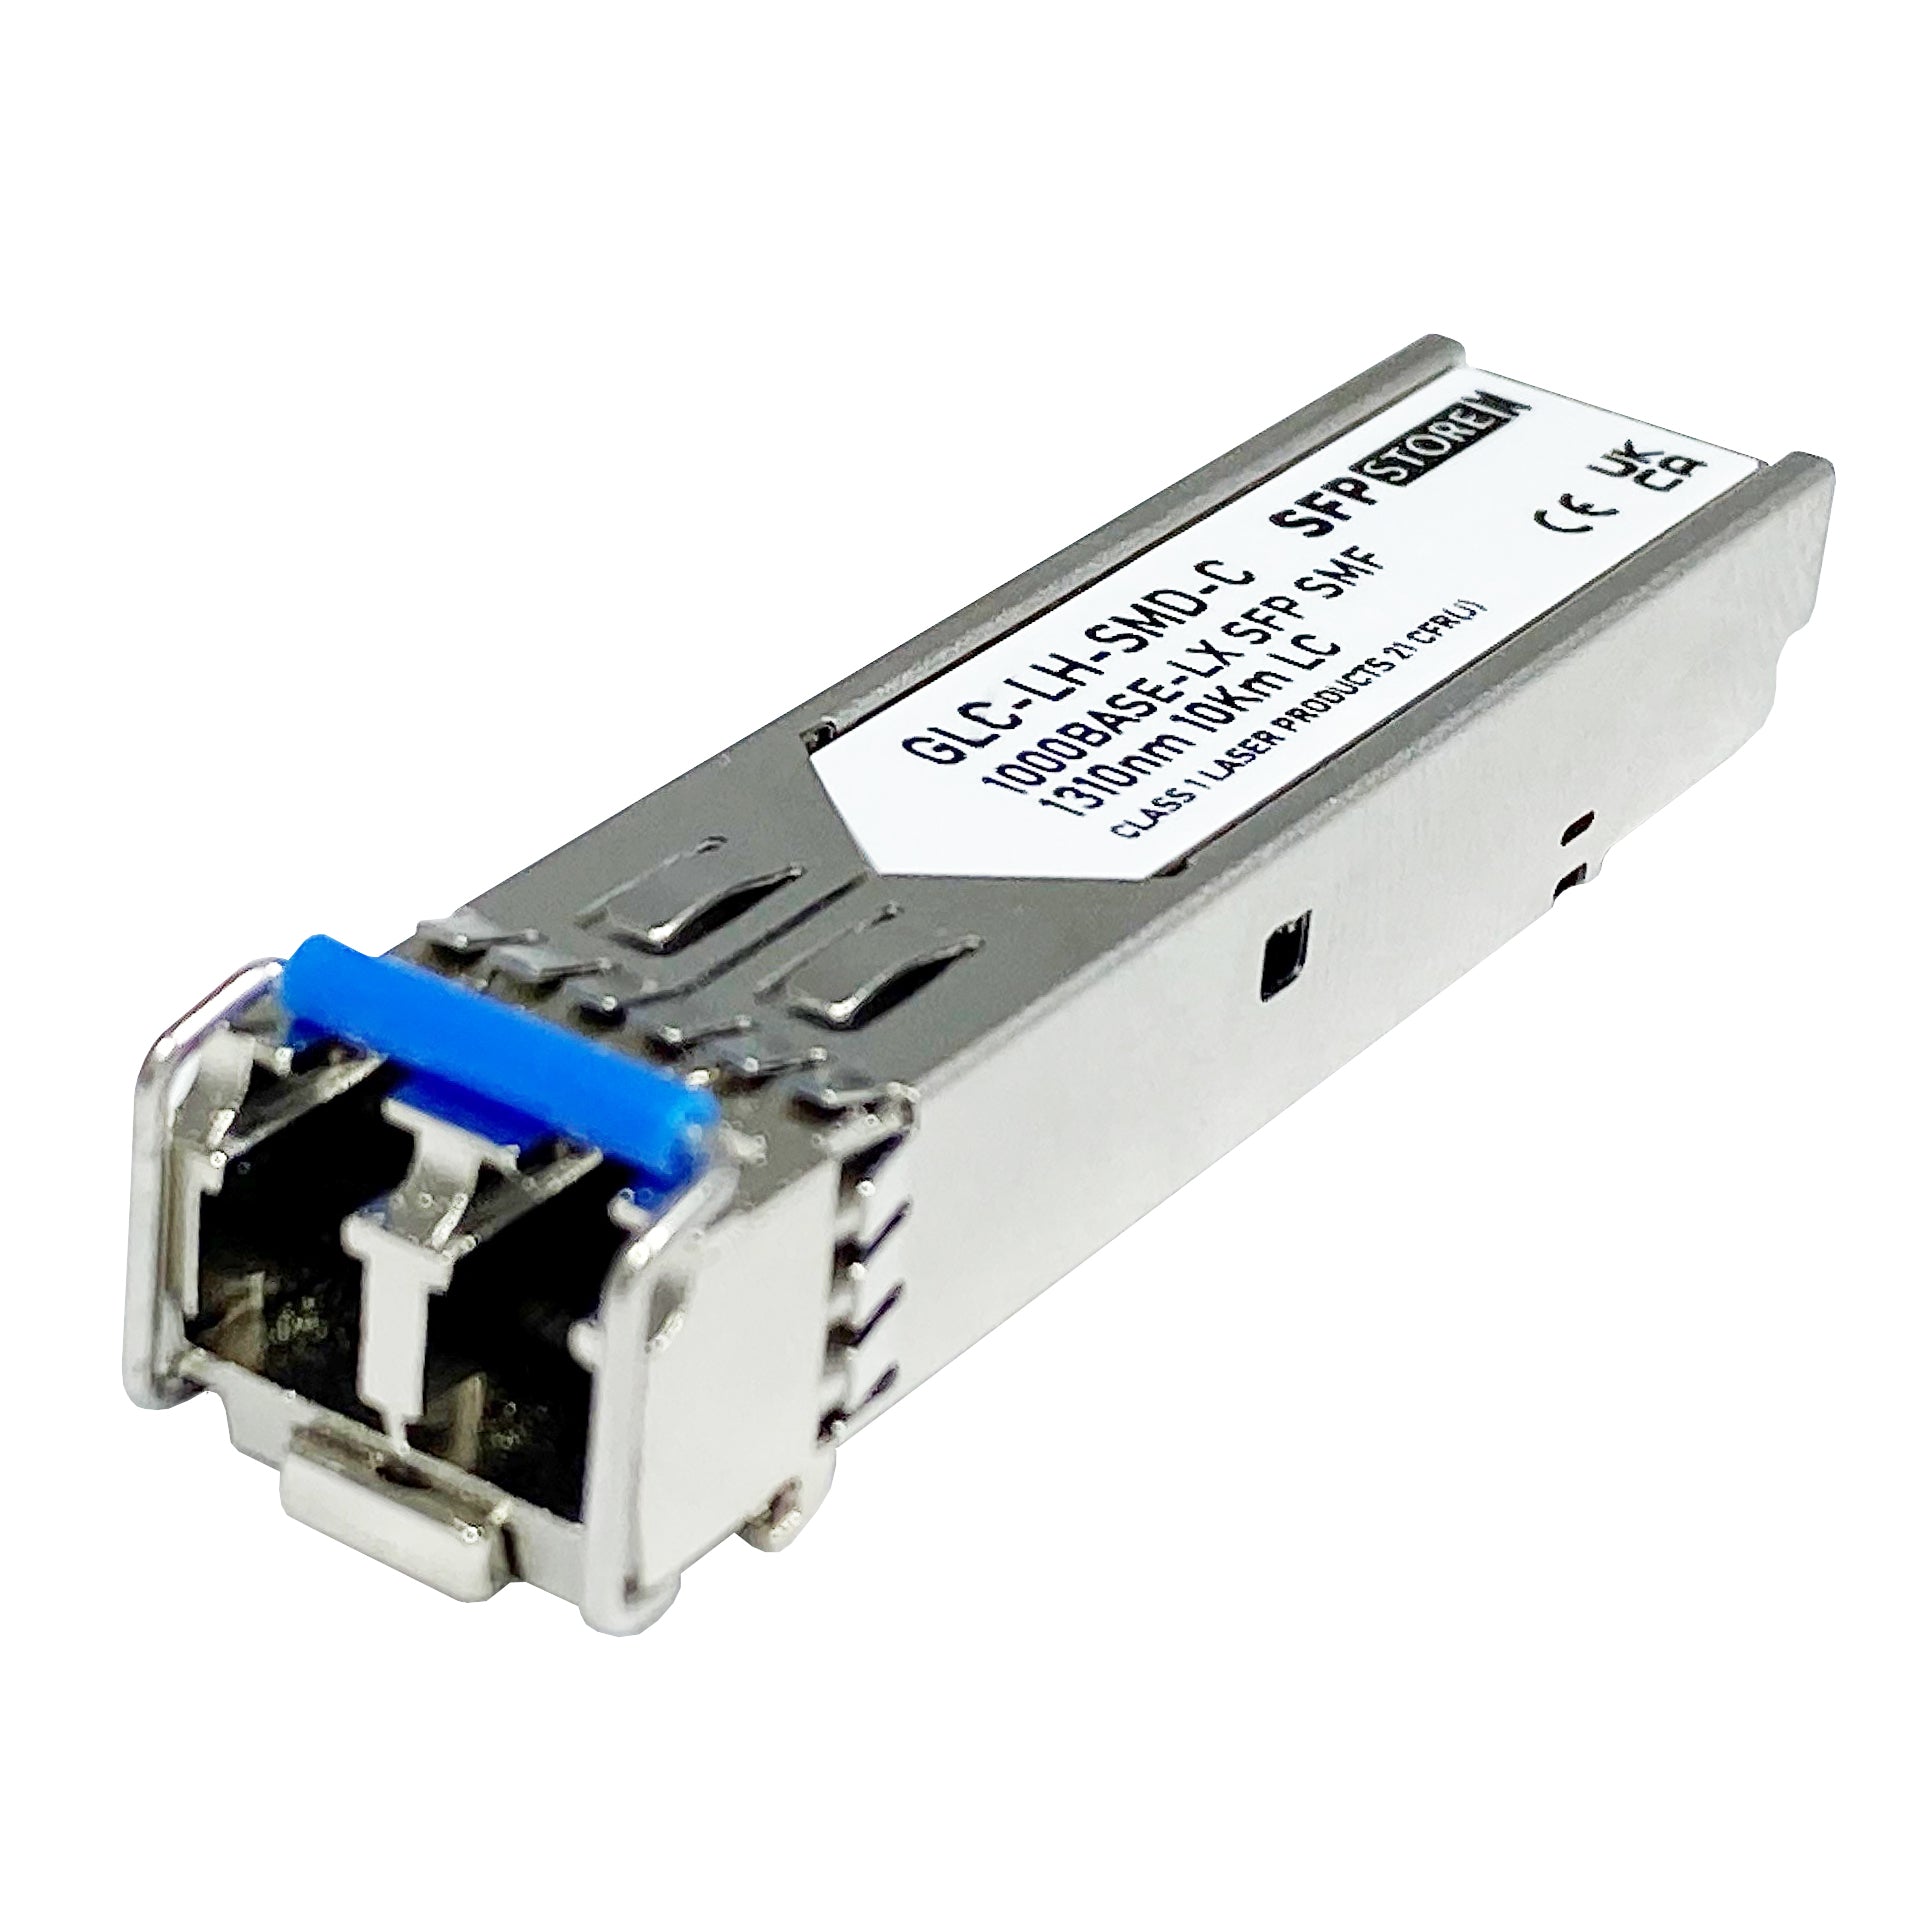 1100-0541-C Westermo Compatible 1G LX SFP LC Transceiver